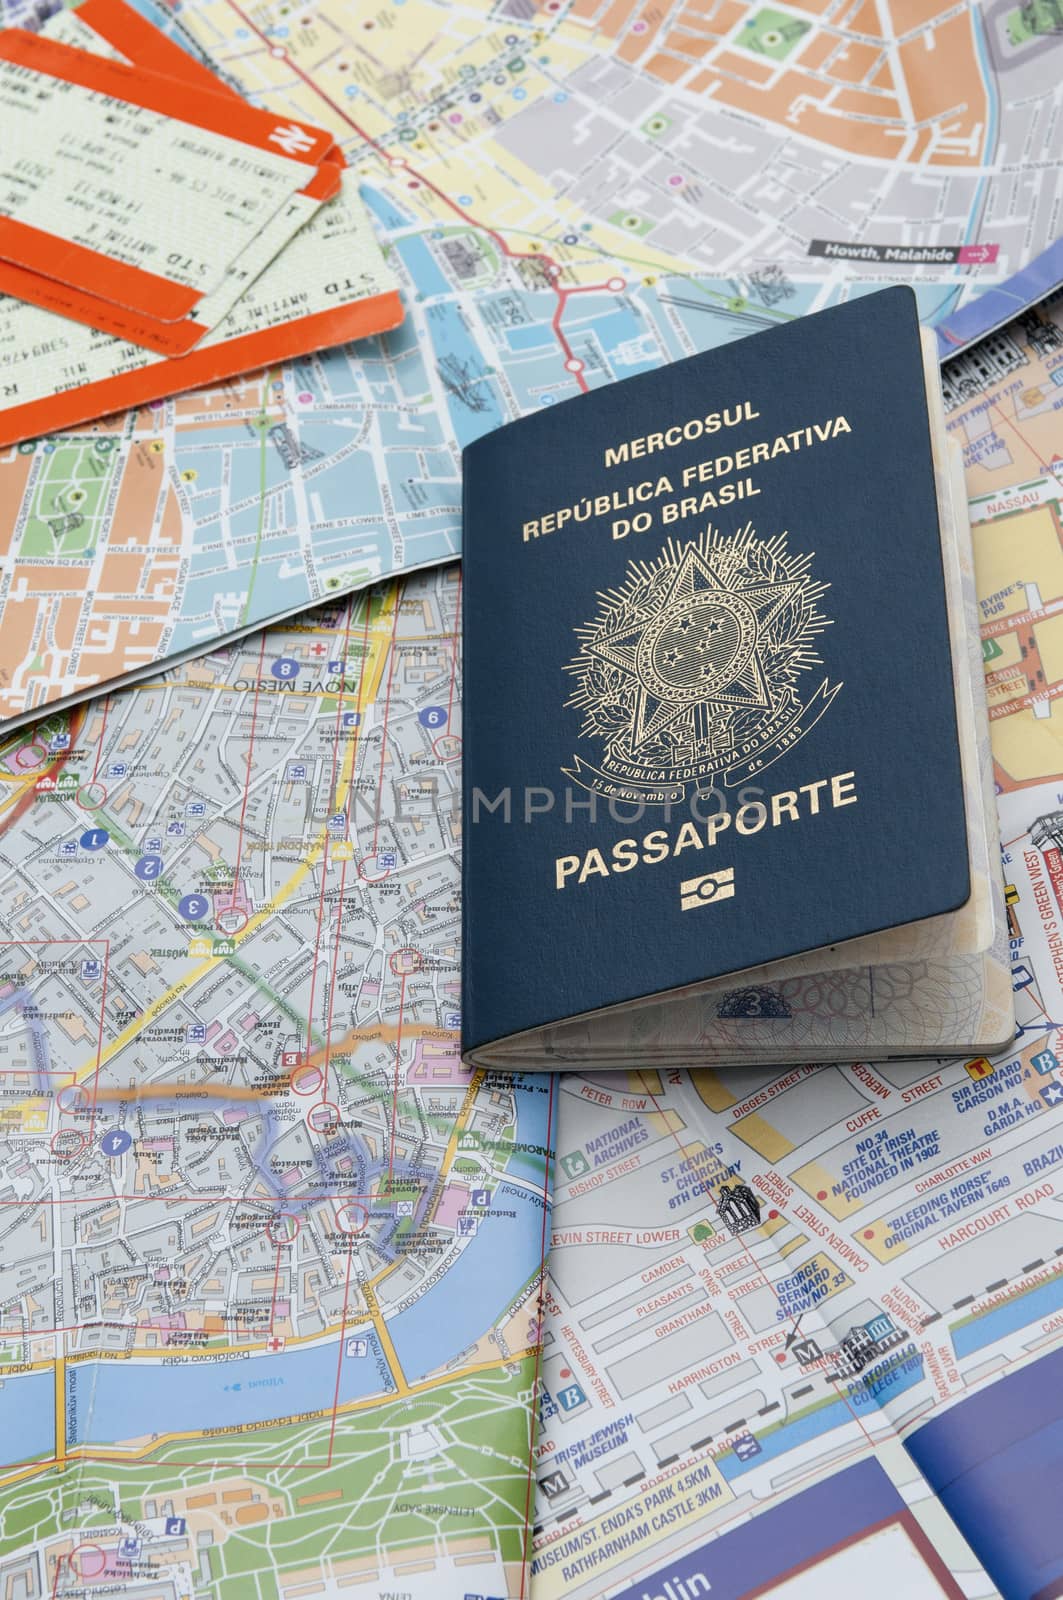 Passport, maps, and tickets on the table